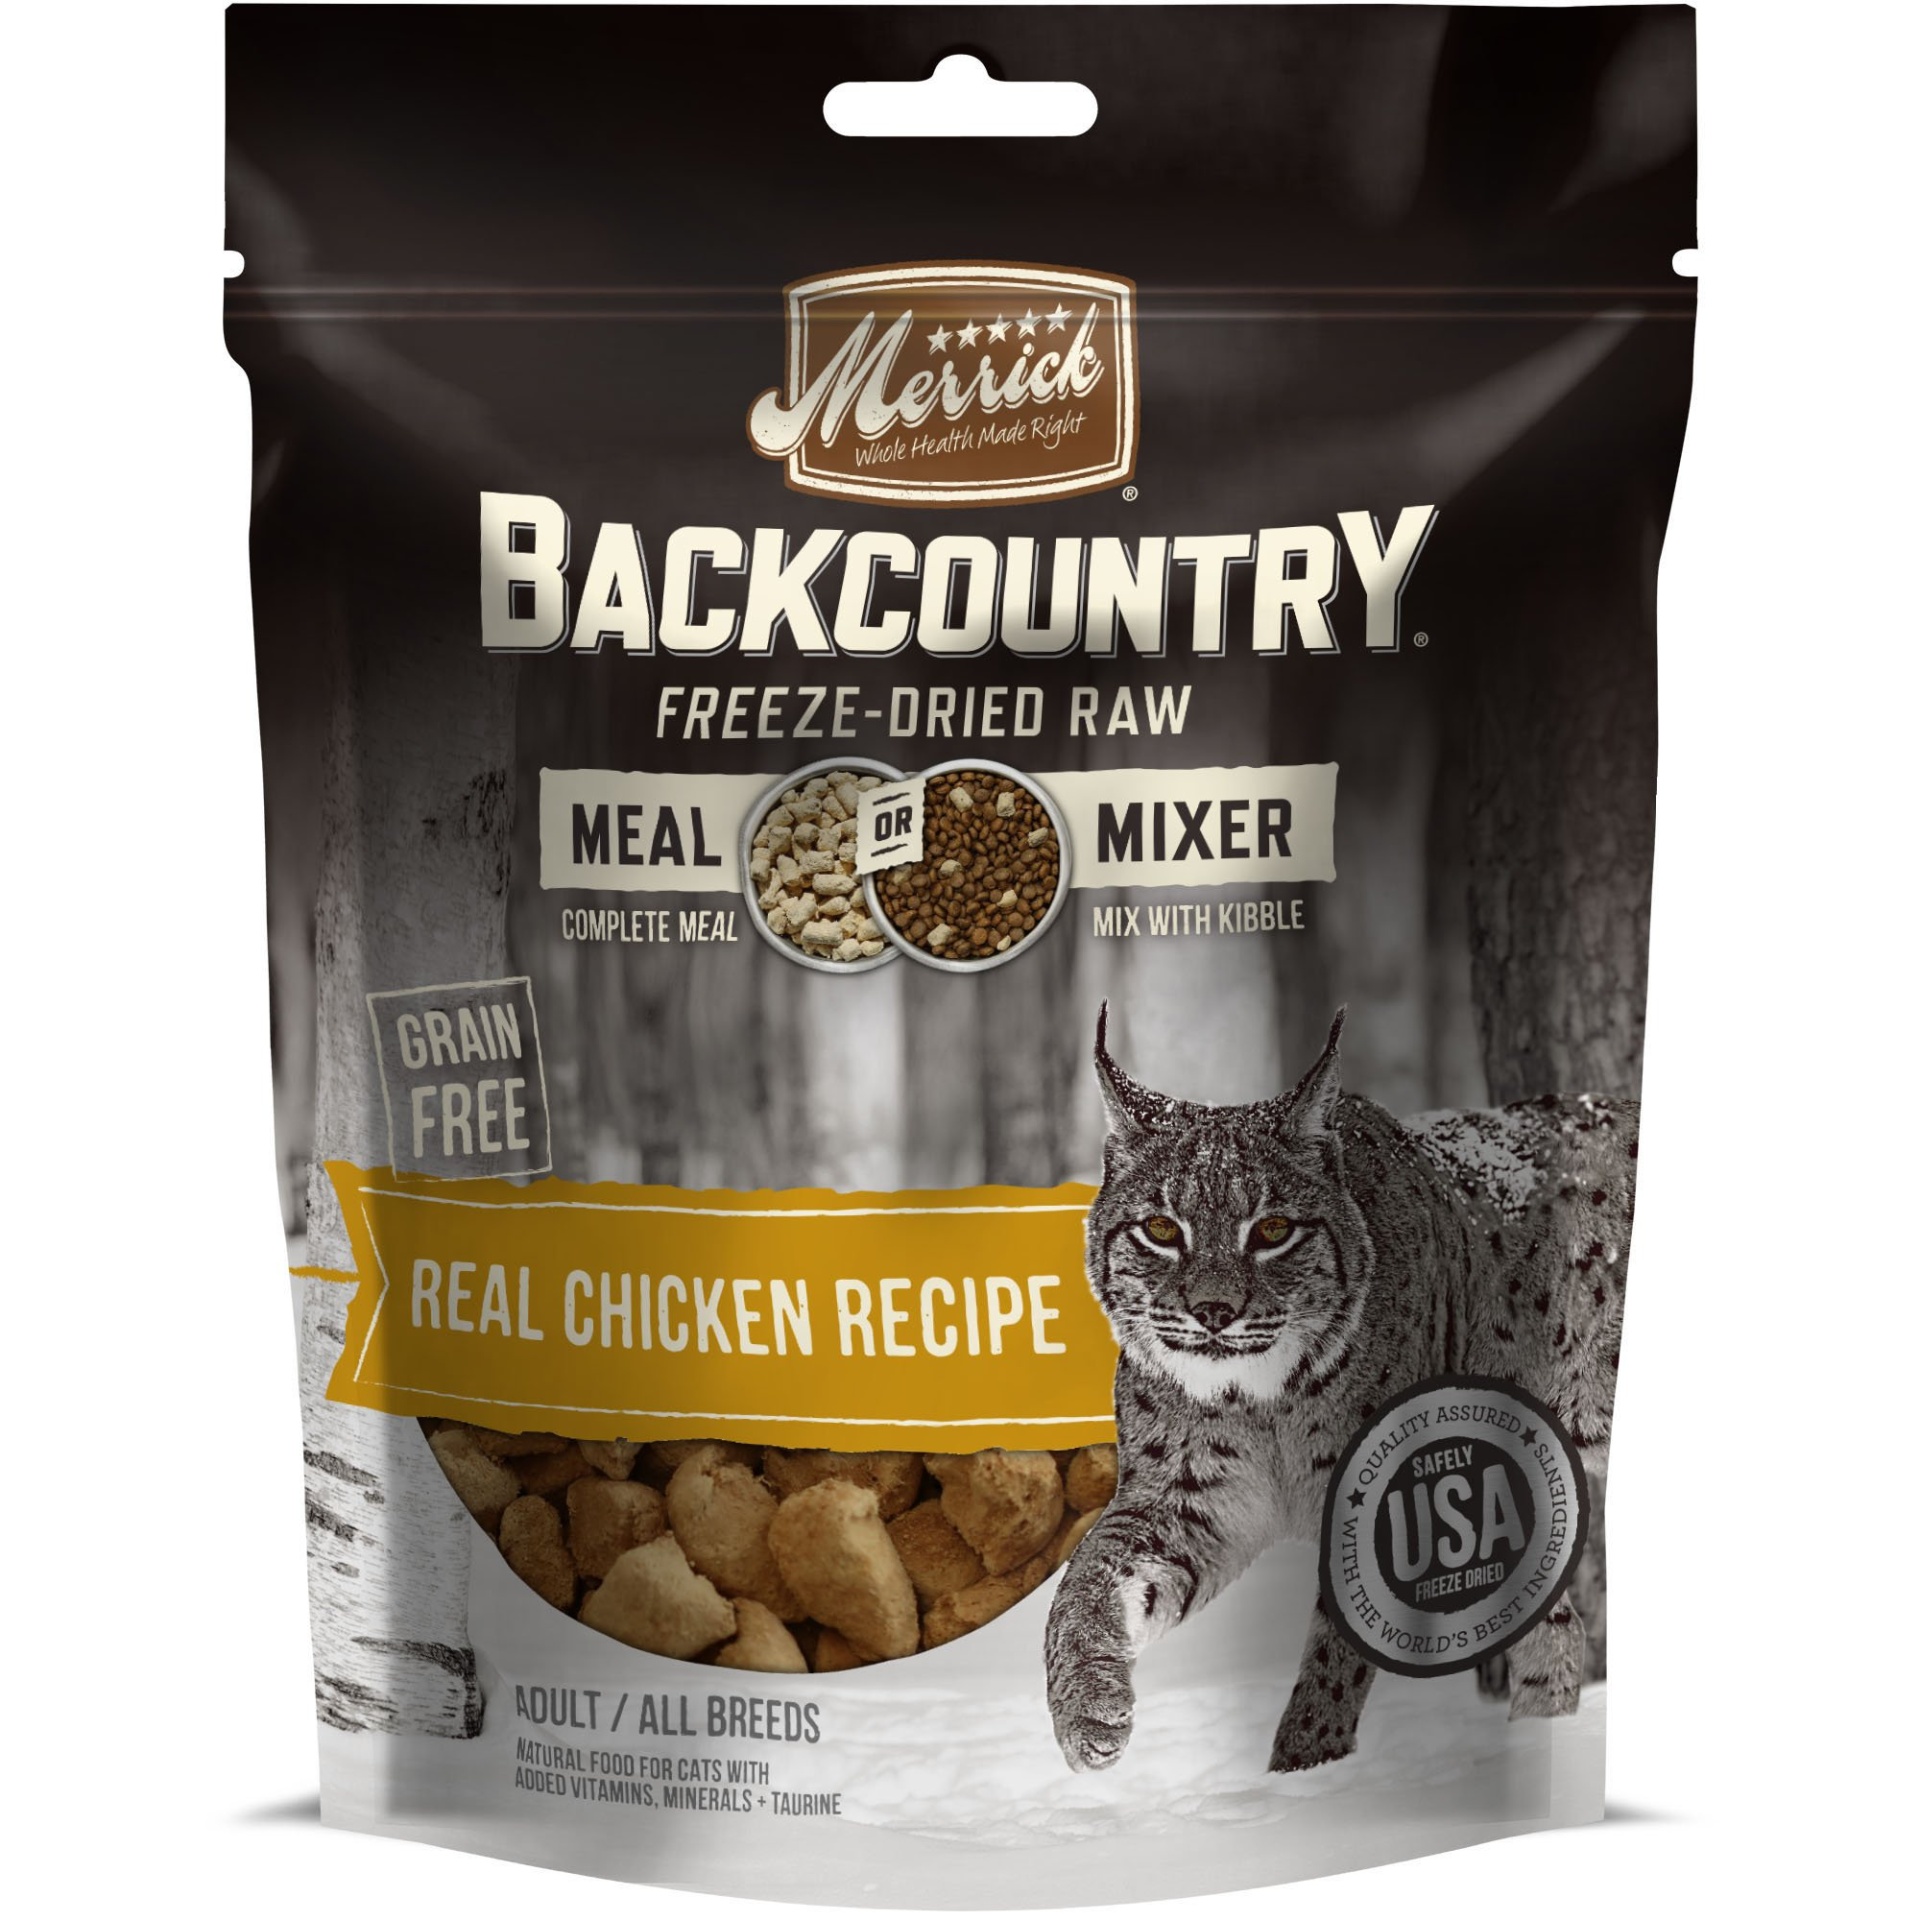 slide 1 of 1, Merrick Backcountry Freeze-Dried Raw Real Chicken Recipe Meal Or Mixer Grain Free Adult Cat Food, 4 oz